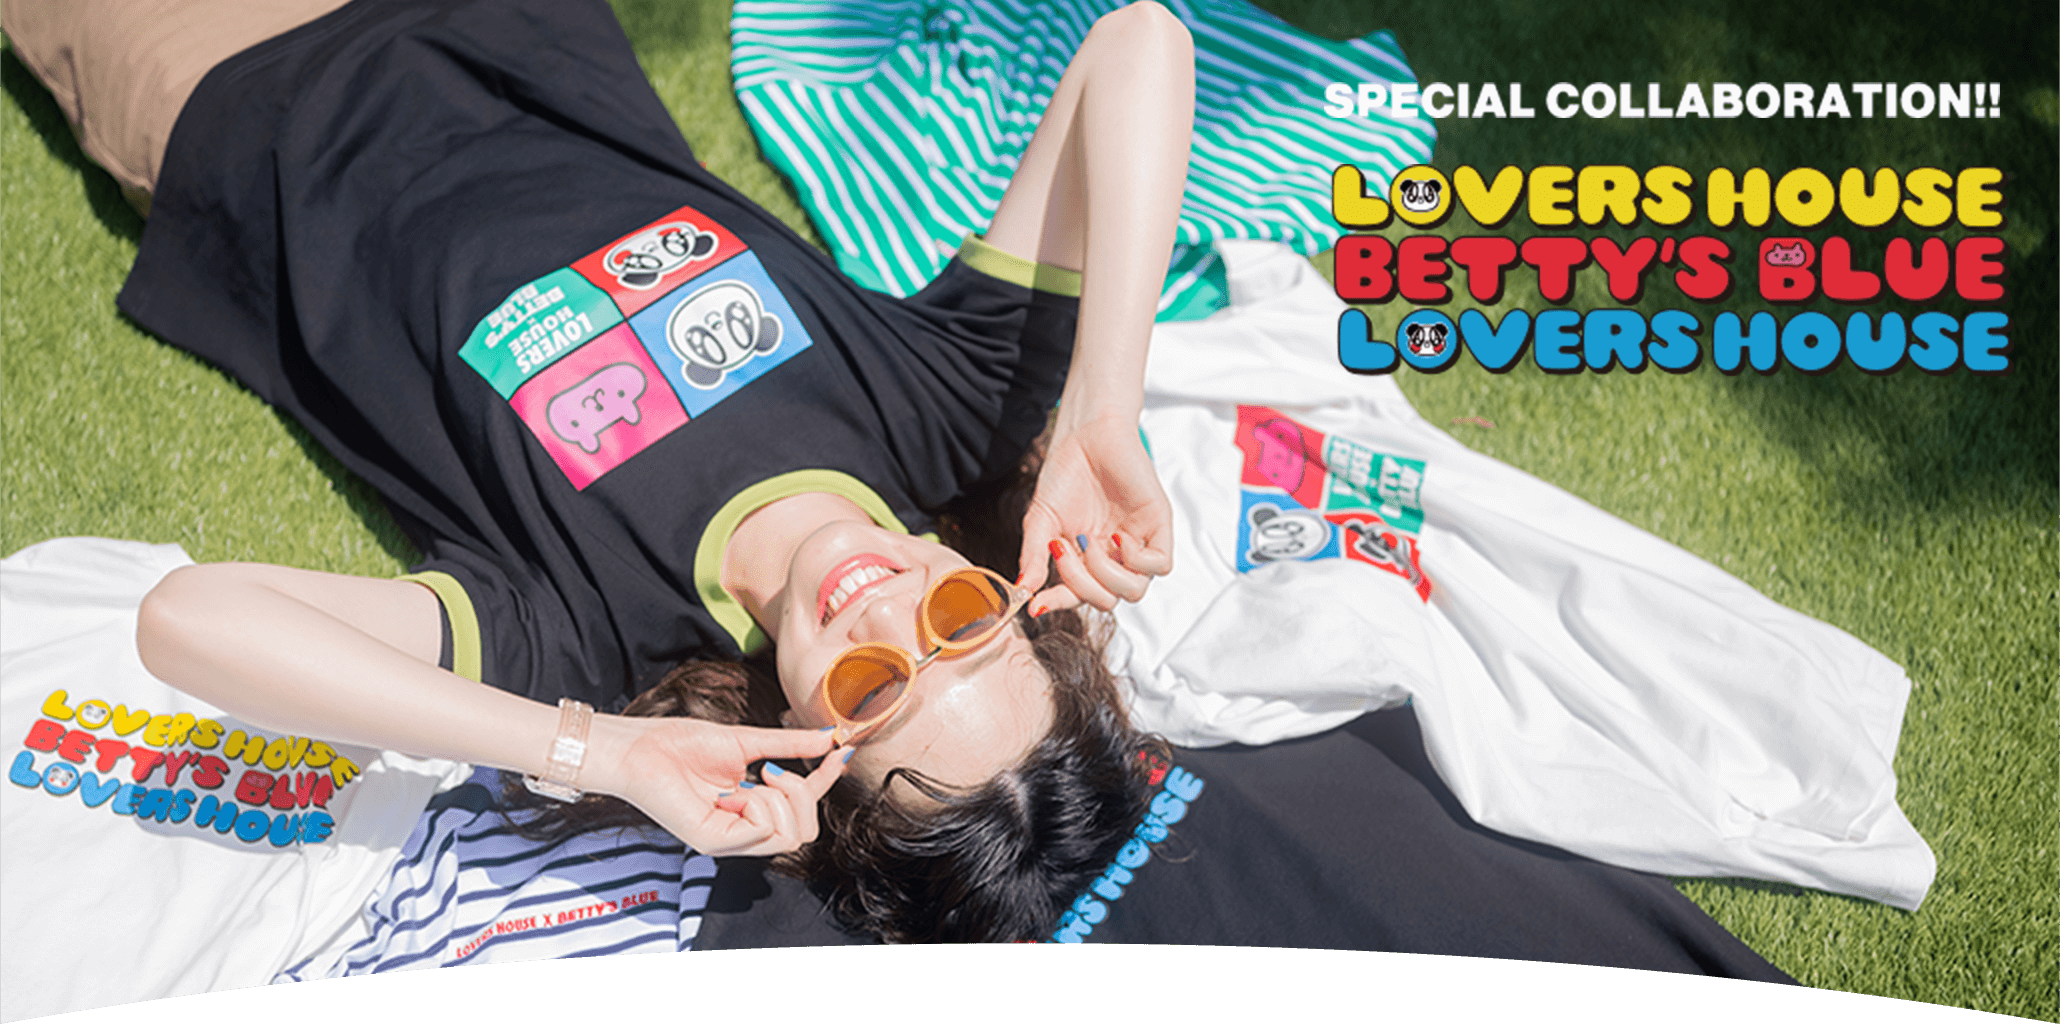 LOVERS HOUSE BETTY′S BLUE SPECIAL COLLABORATION!!